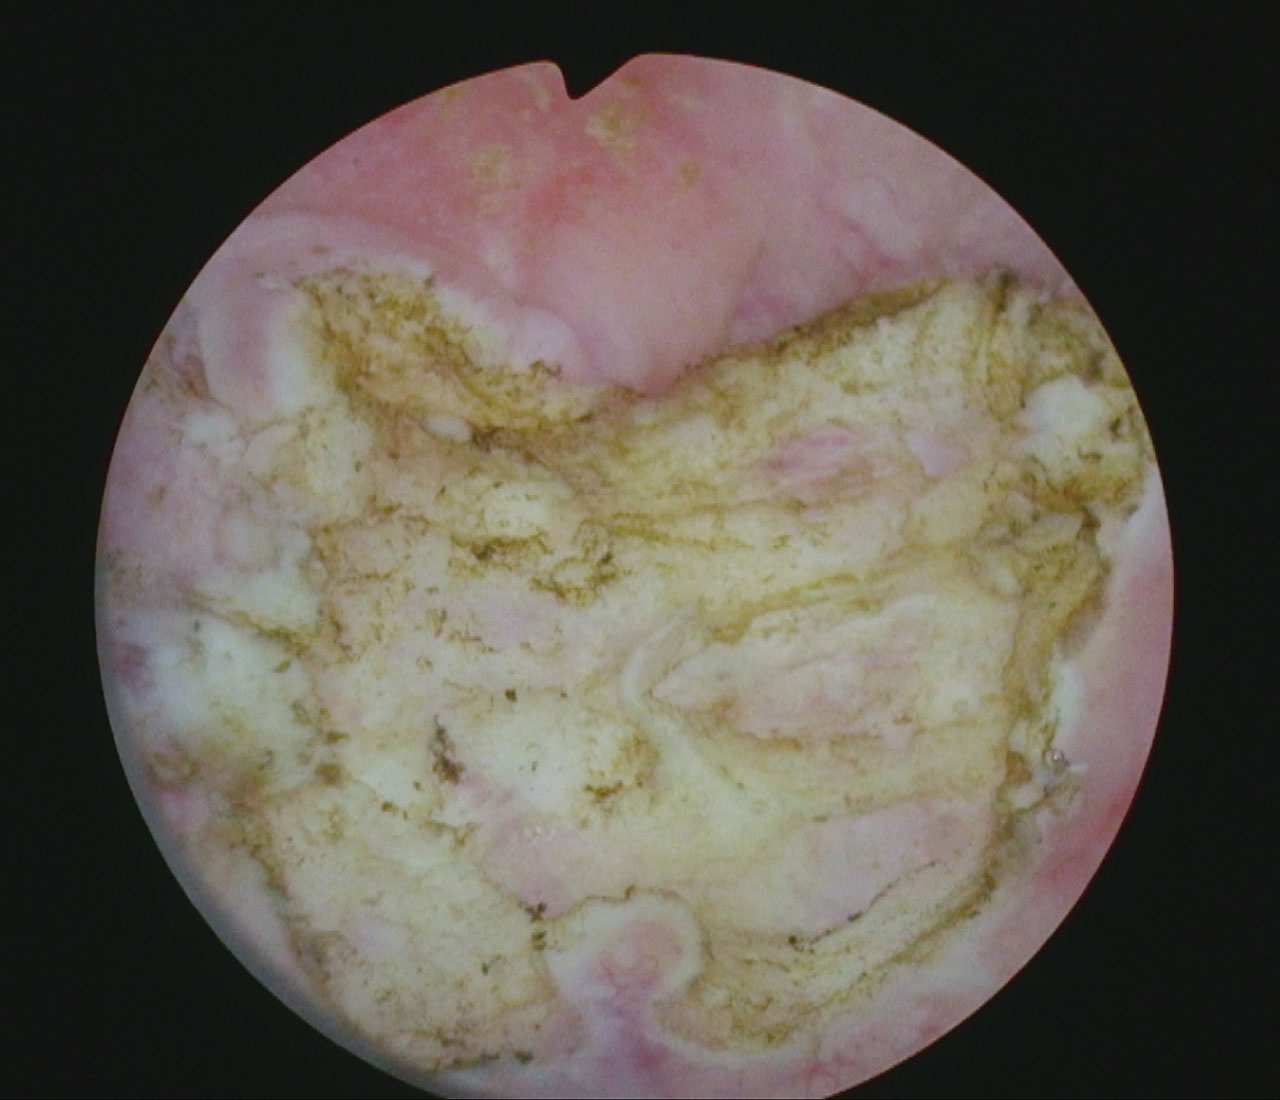 Appearance of the bladder after the resection.